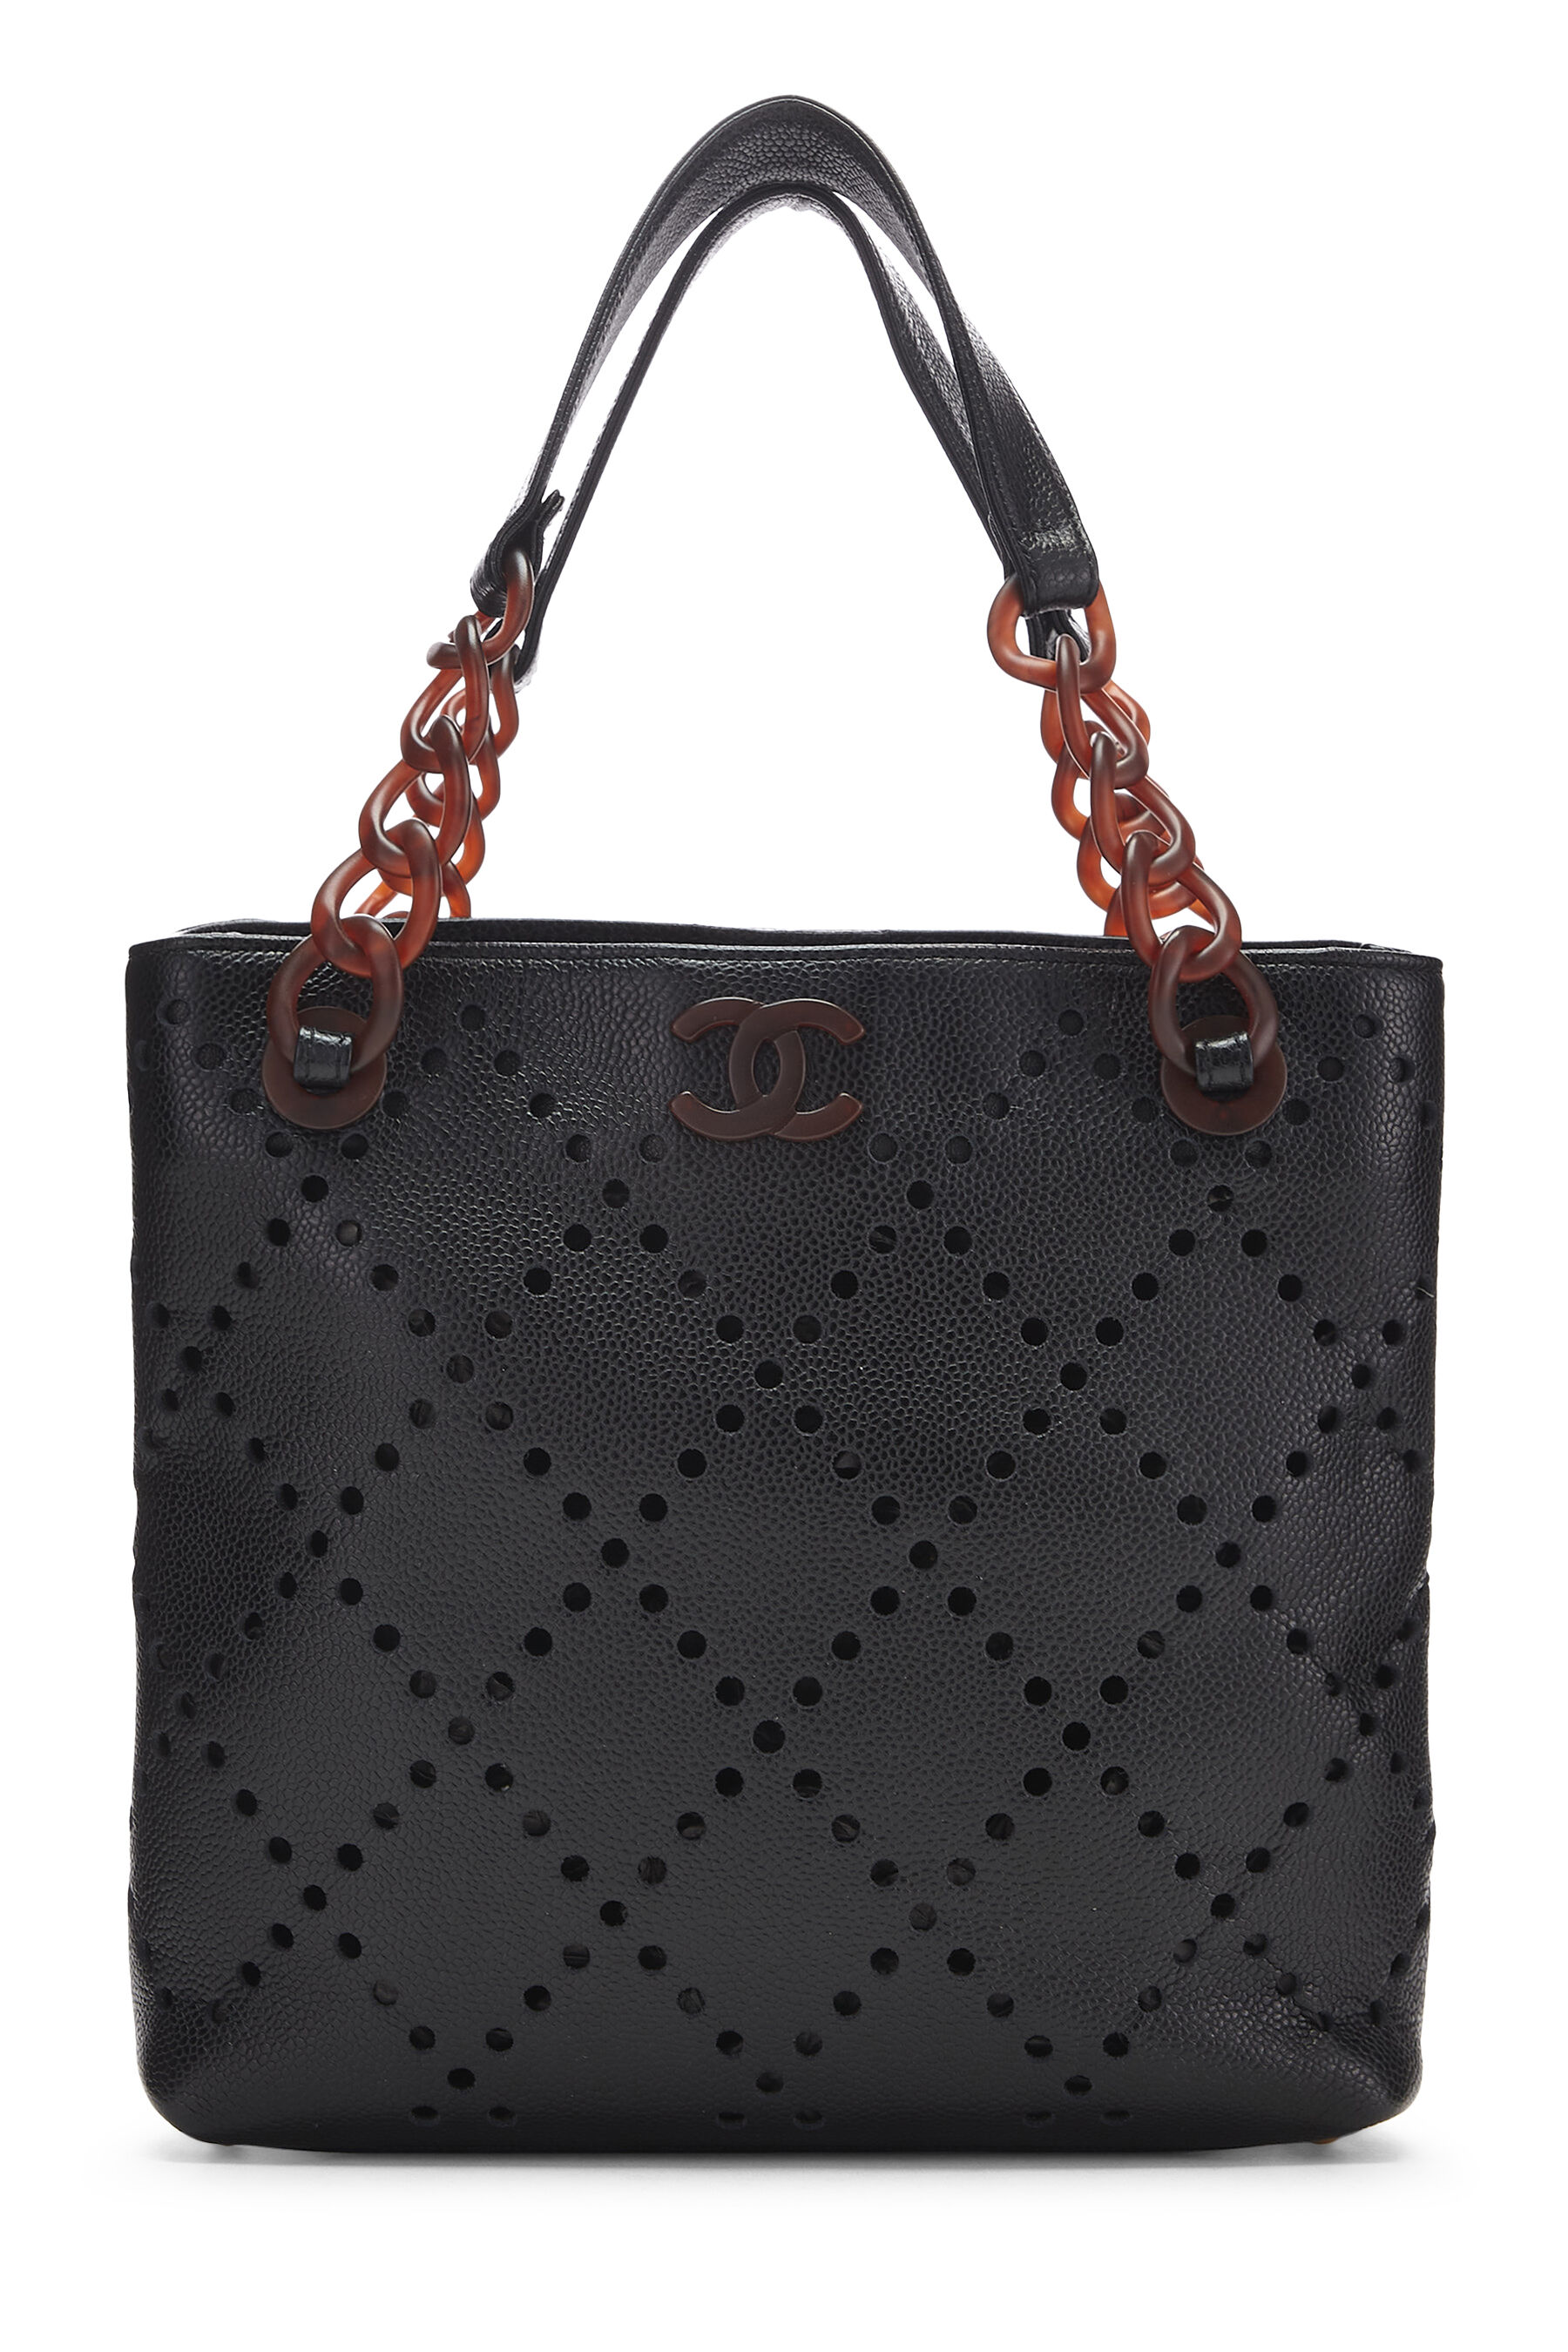 Chanel Black Perforated Patent Leather Vertical Bucket Tote Q6B1G627KB000